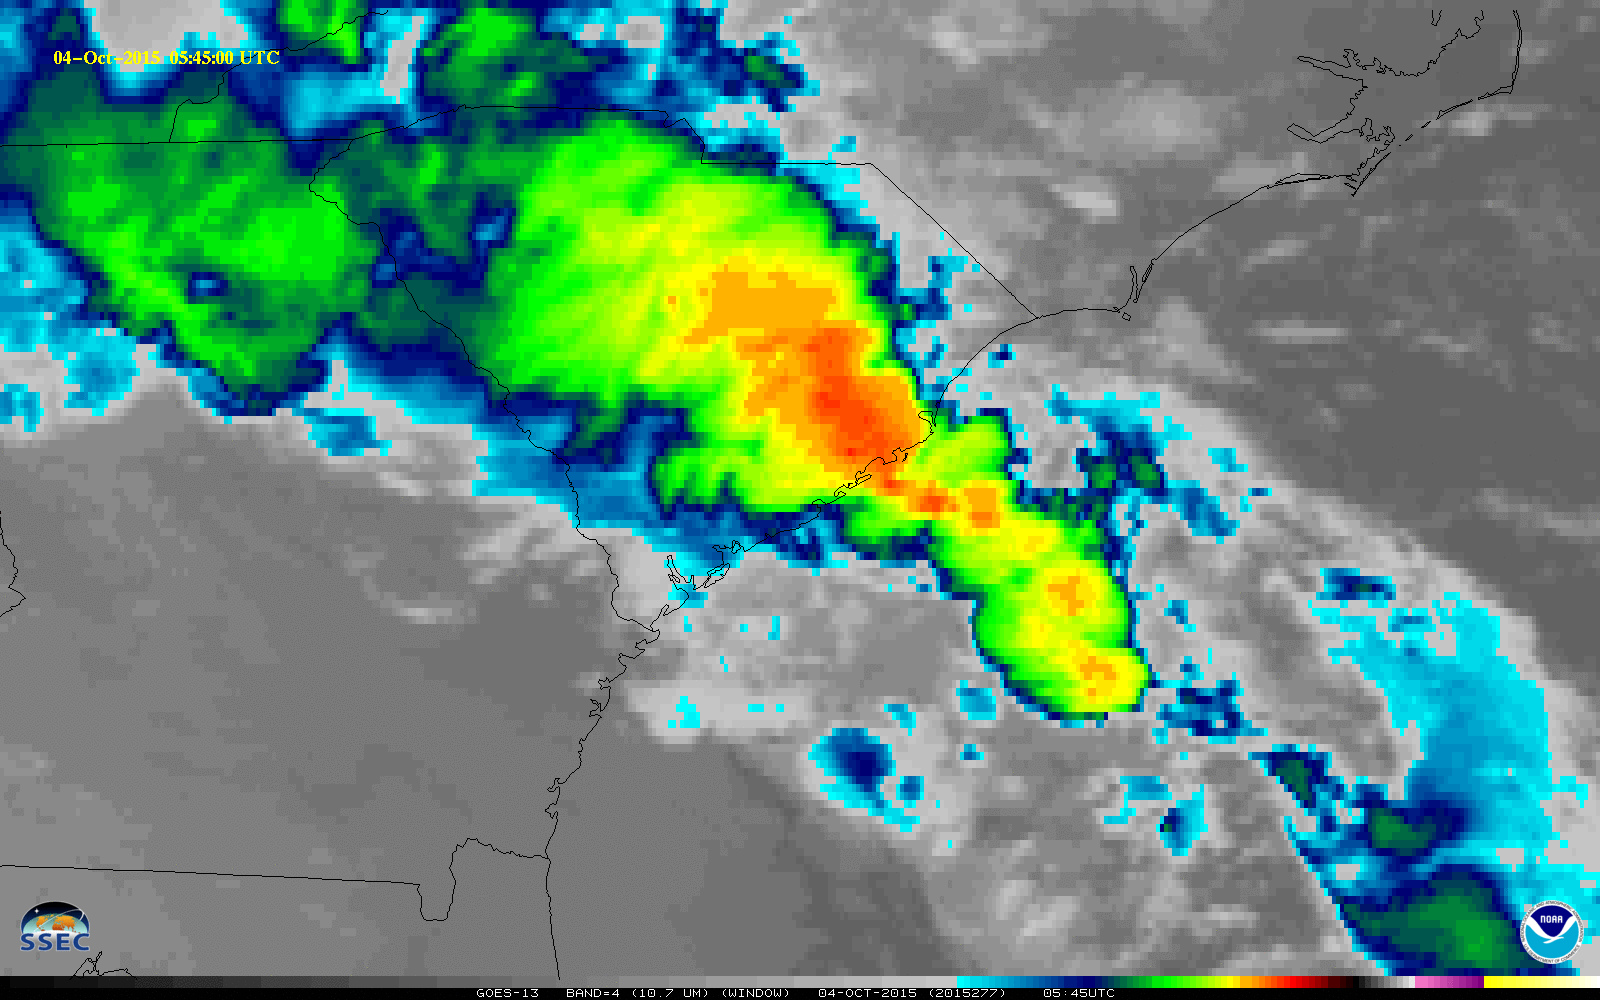 GOES-13 Infrared (10.7 µm) Imagery, 0015 UTC 1 October through 1145 UTC 5 October 2015 [click to animate]